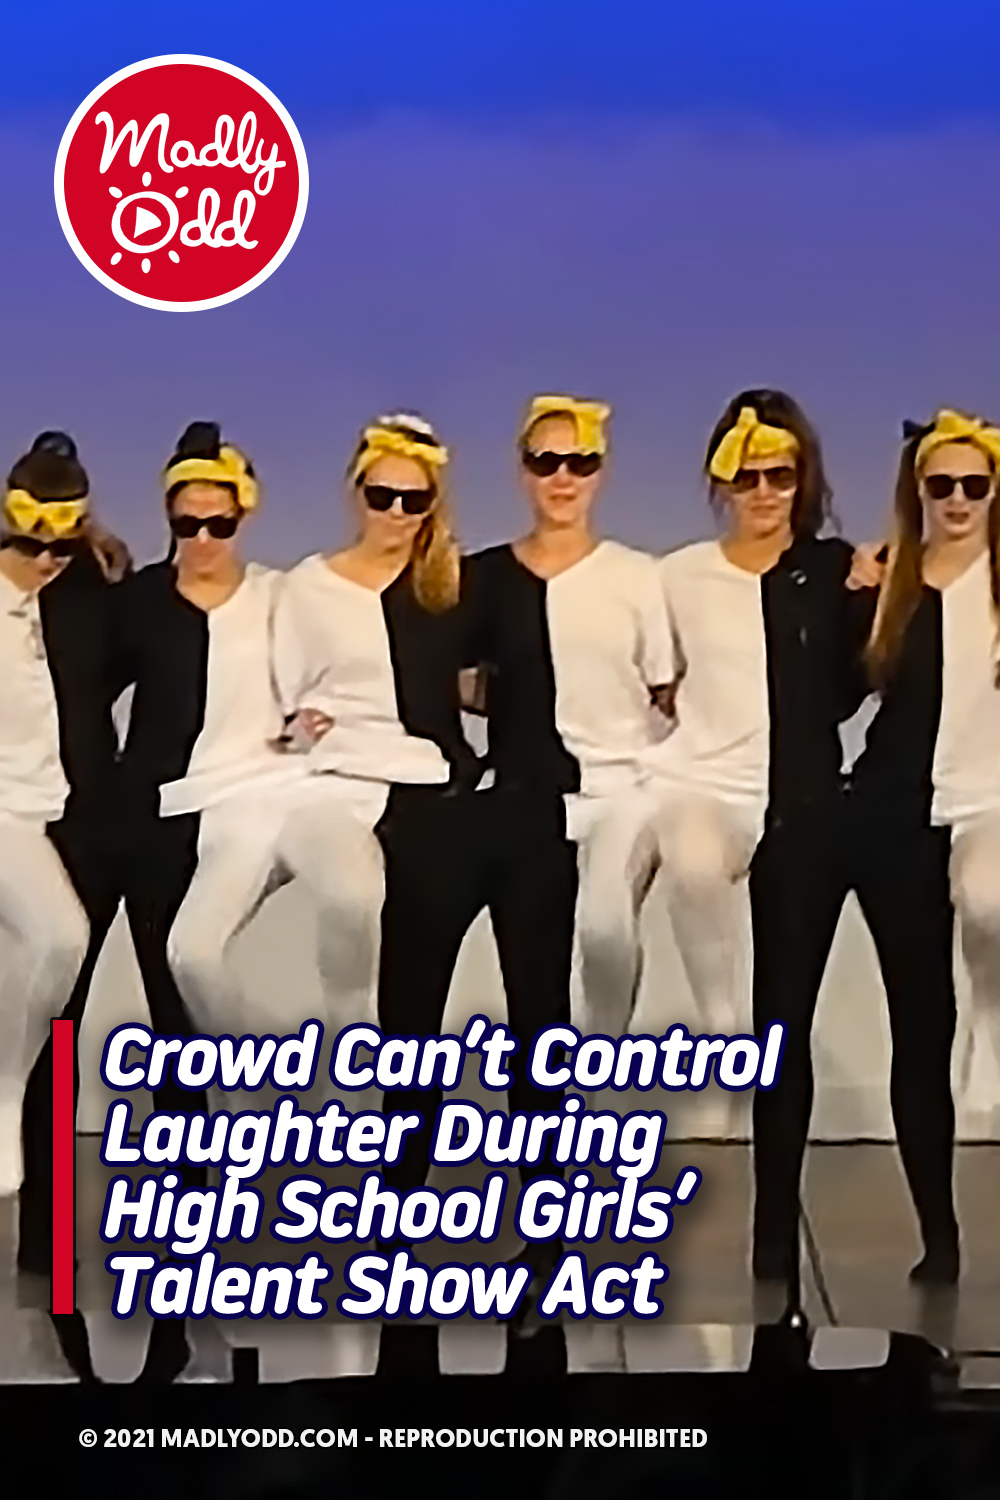 Crowd Can’t Control Laughter During High School Girls’ Talent Show Act